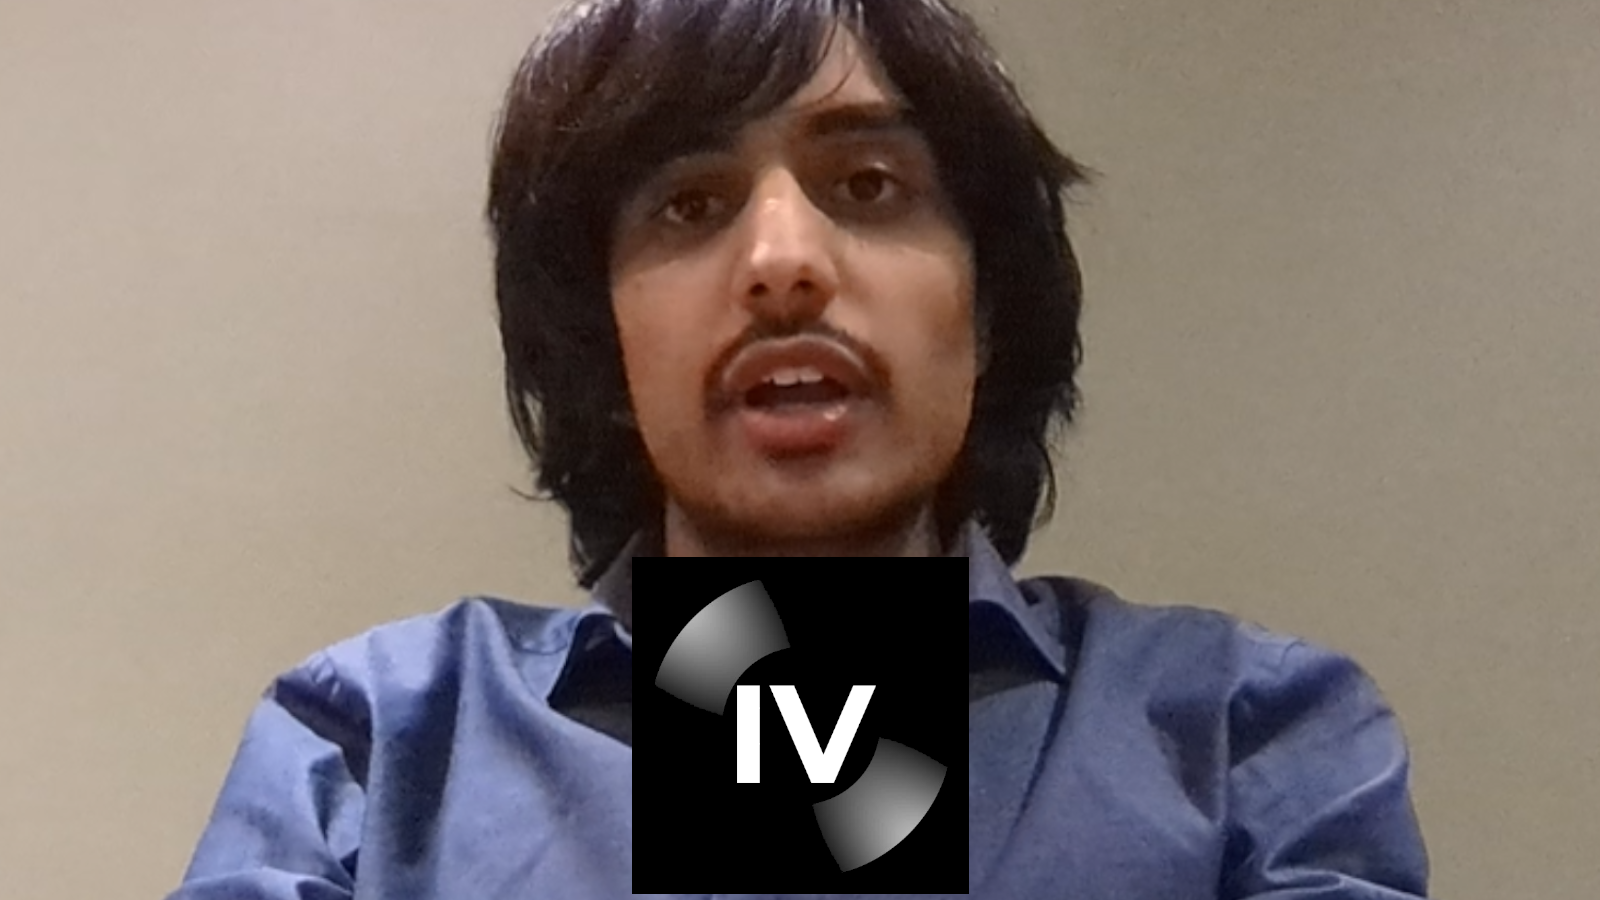 Iyan Velji, Founder of IV Times, Reveals Himself in First Interview